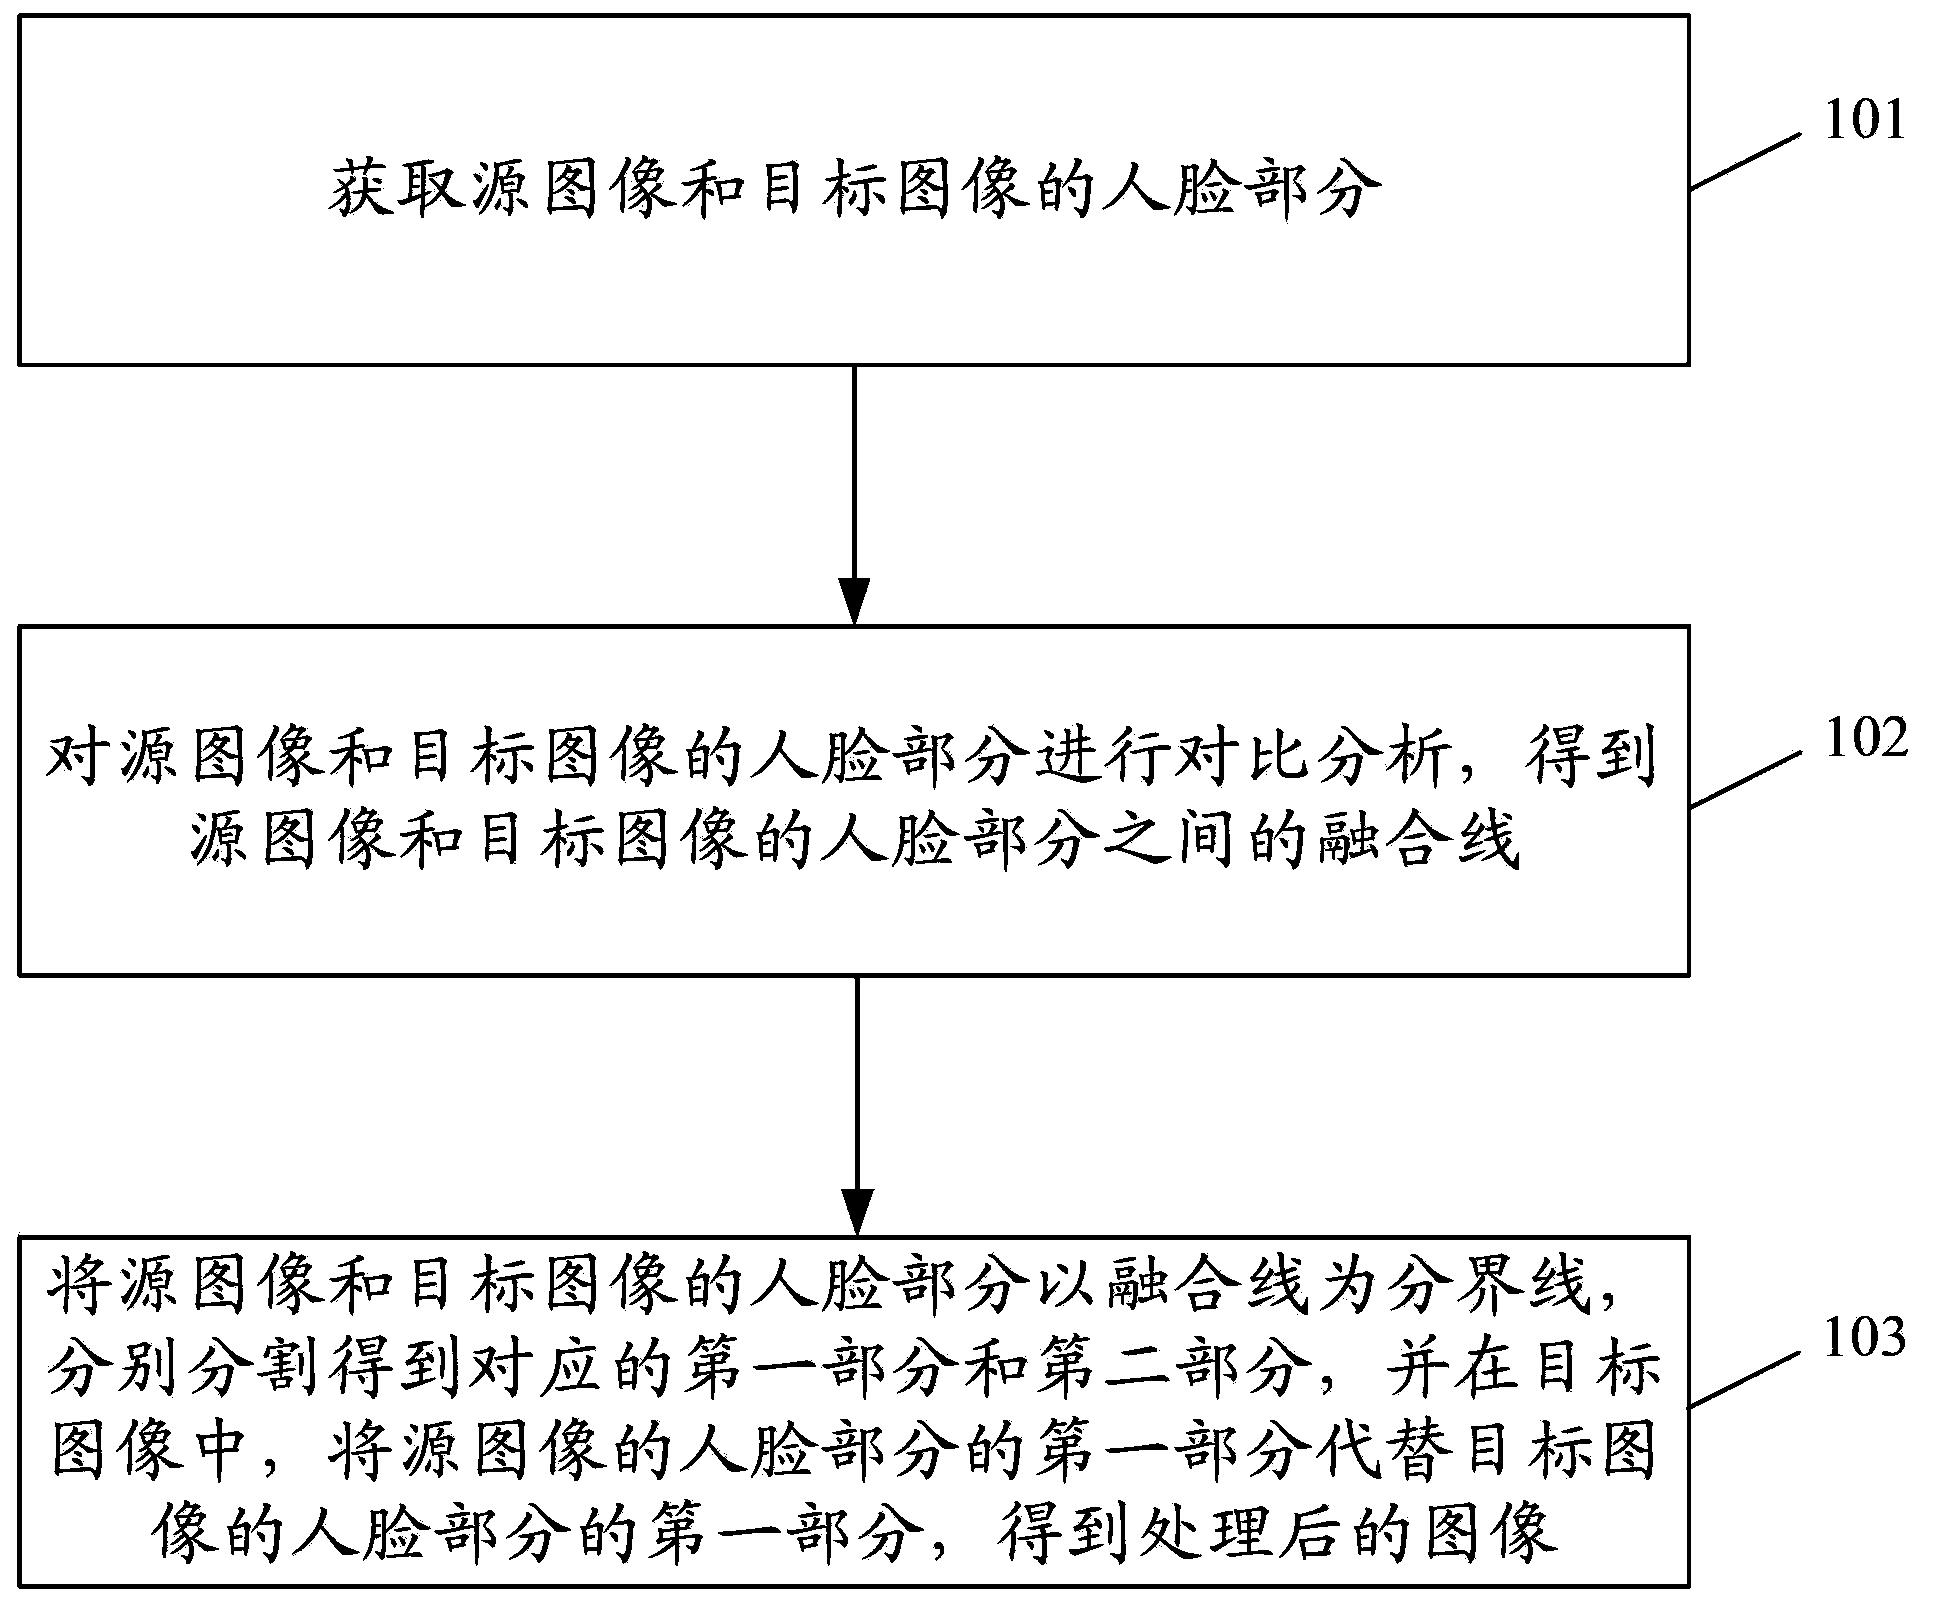 Image processing method and image processing device